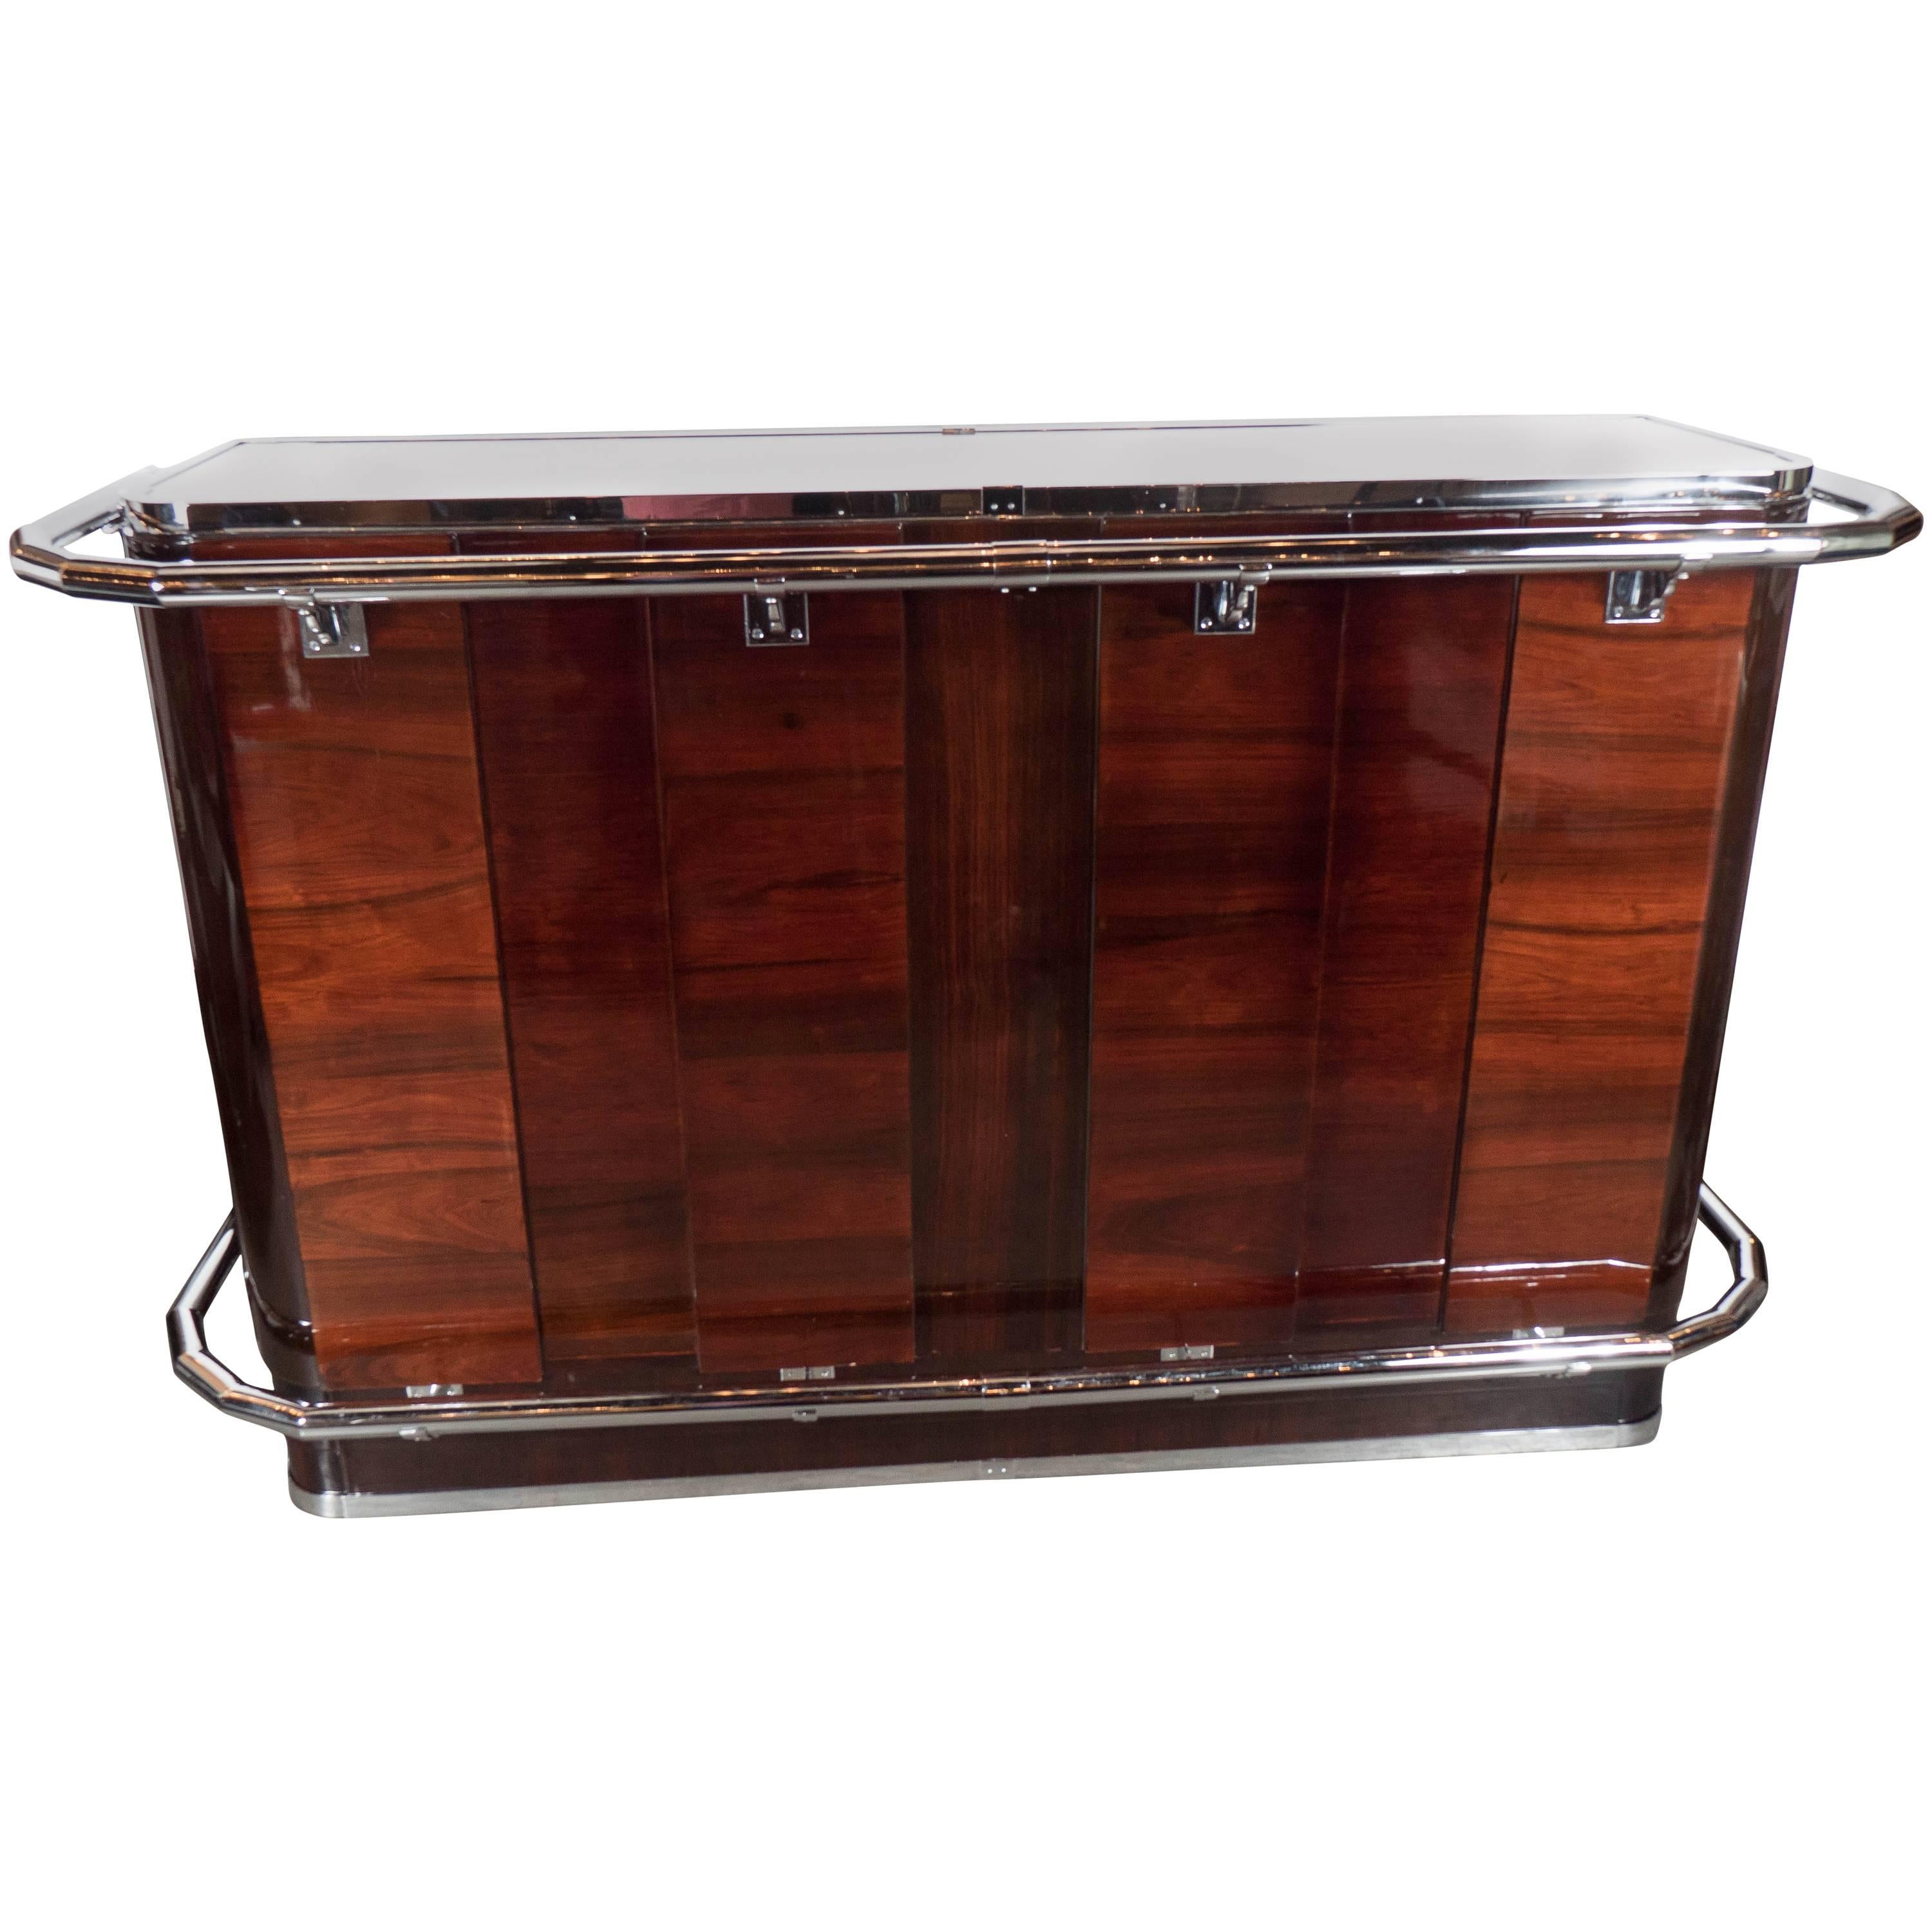 Art Deco Bar in Mahogany with Nickel Accents and Mirrored Top